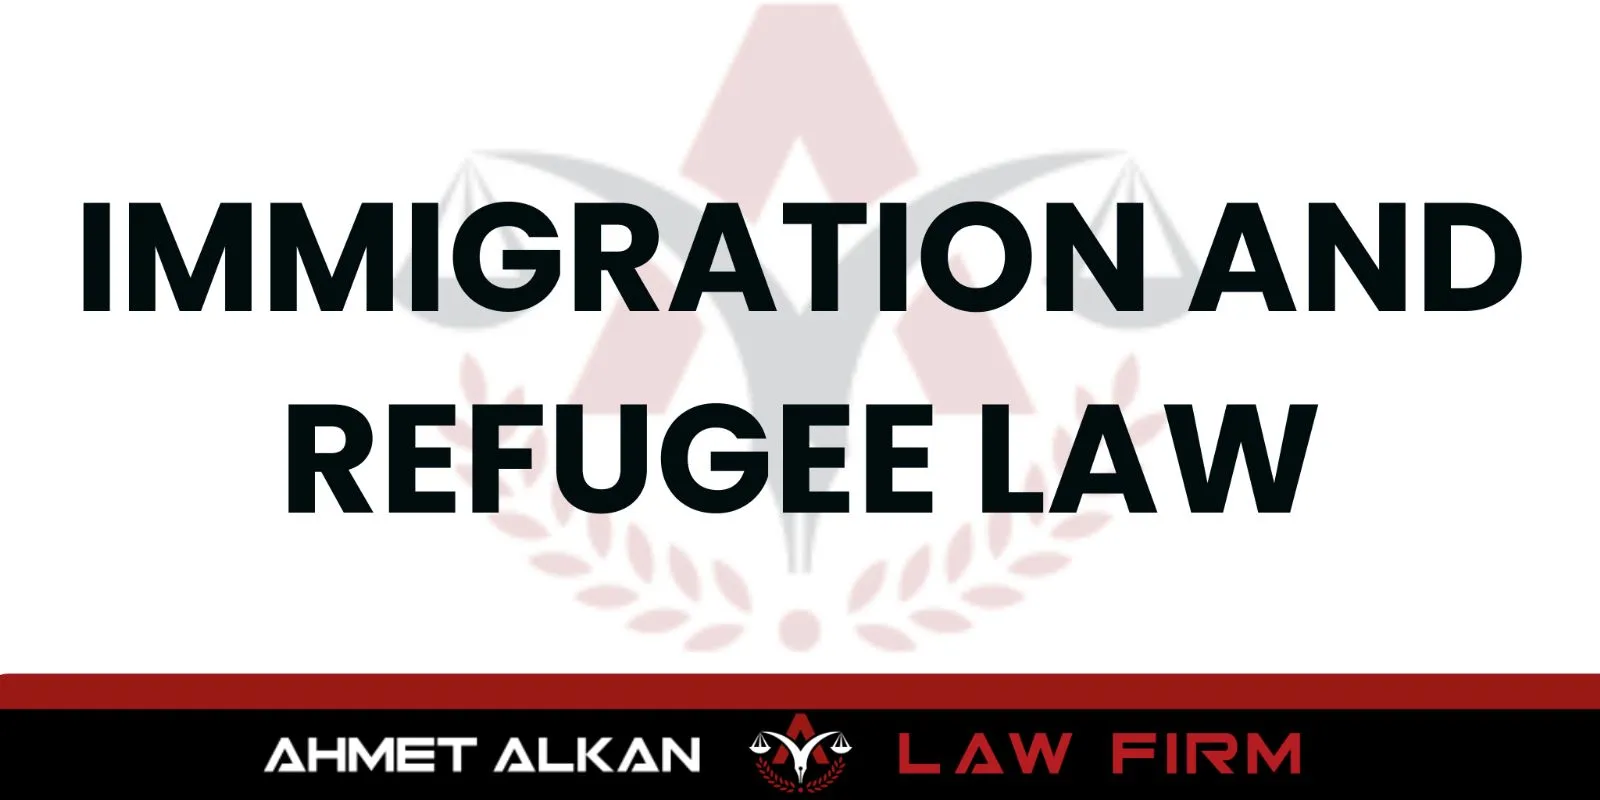 Antalya immigration and refugee lawyer is a lawyer with expertise competence and experience in the fields of immigration law